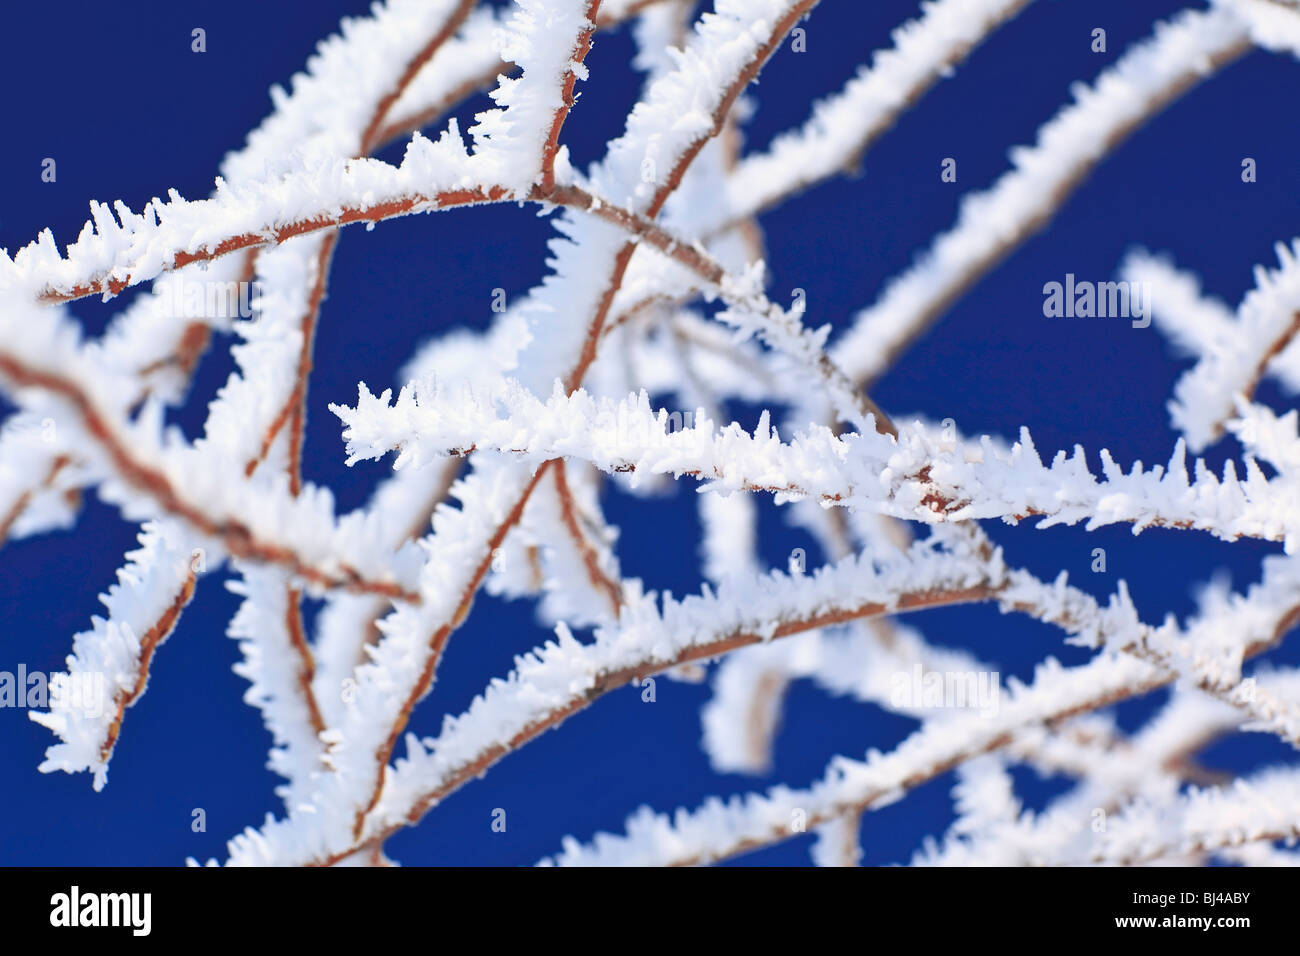 Hoar frost covered branches on a clear winter day, Winnipeg, Manitoba, Canada. Stock Photo